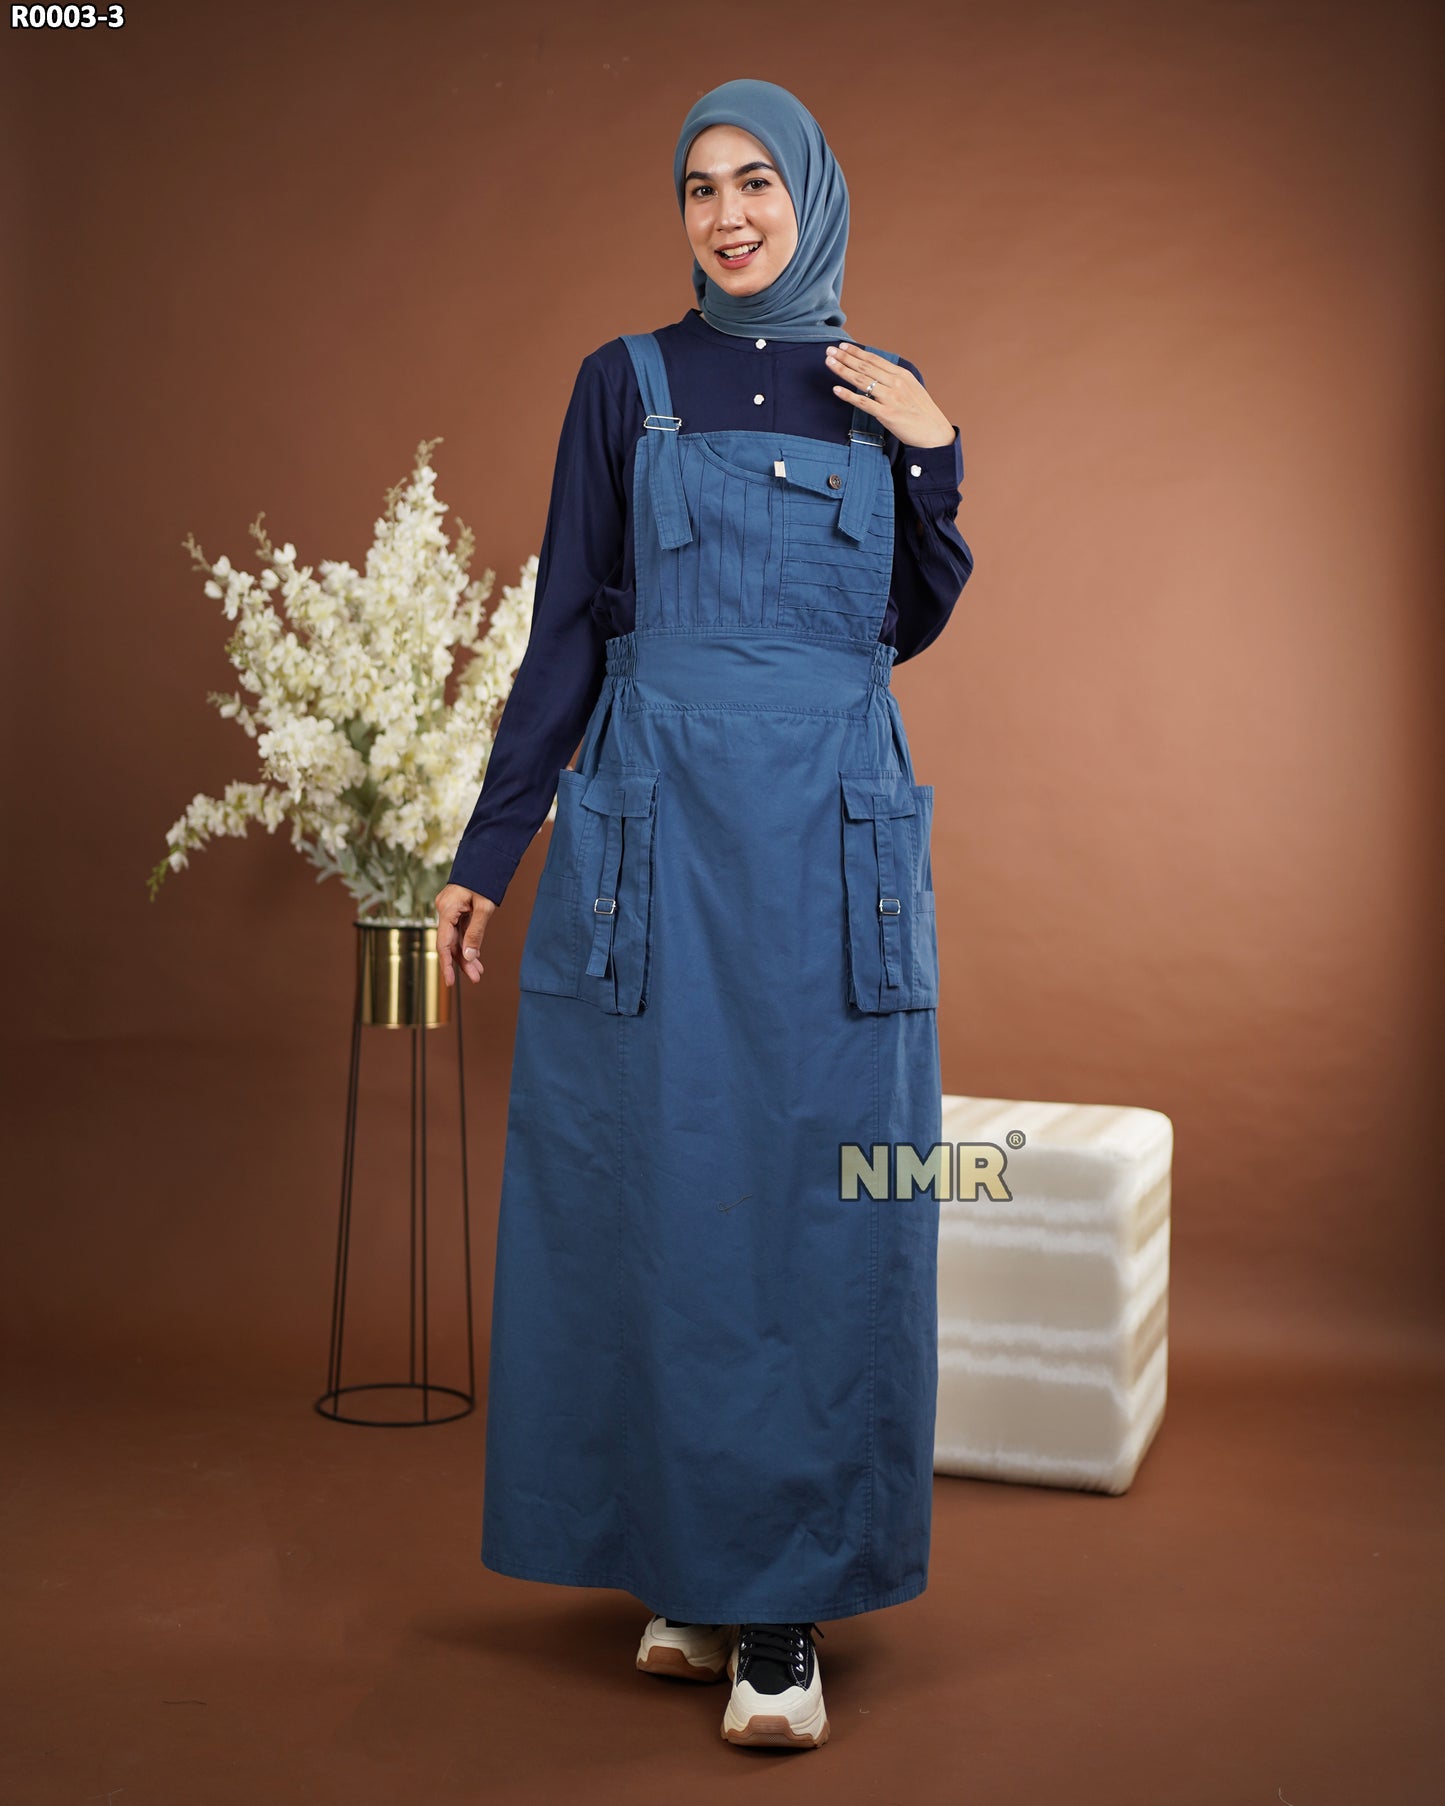 NMR Gamis Jumpsuit Overall Baby Canvas Vol R003-3